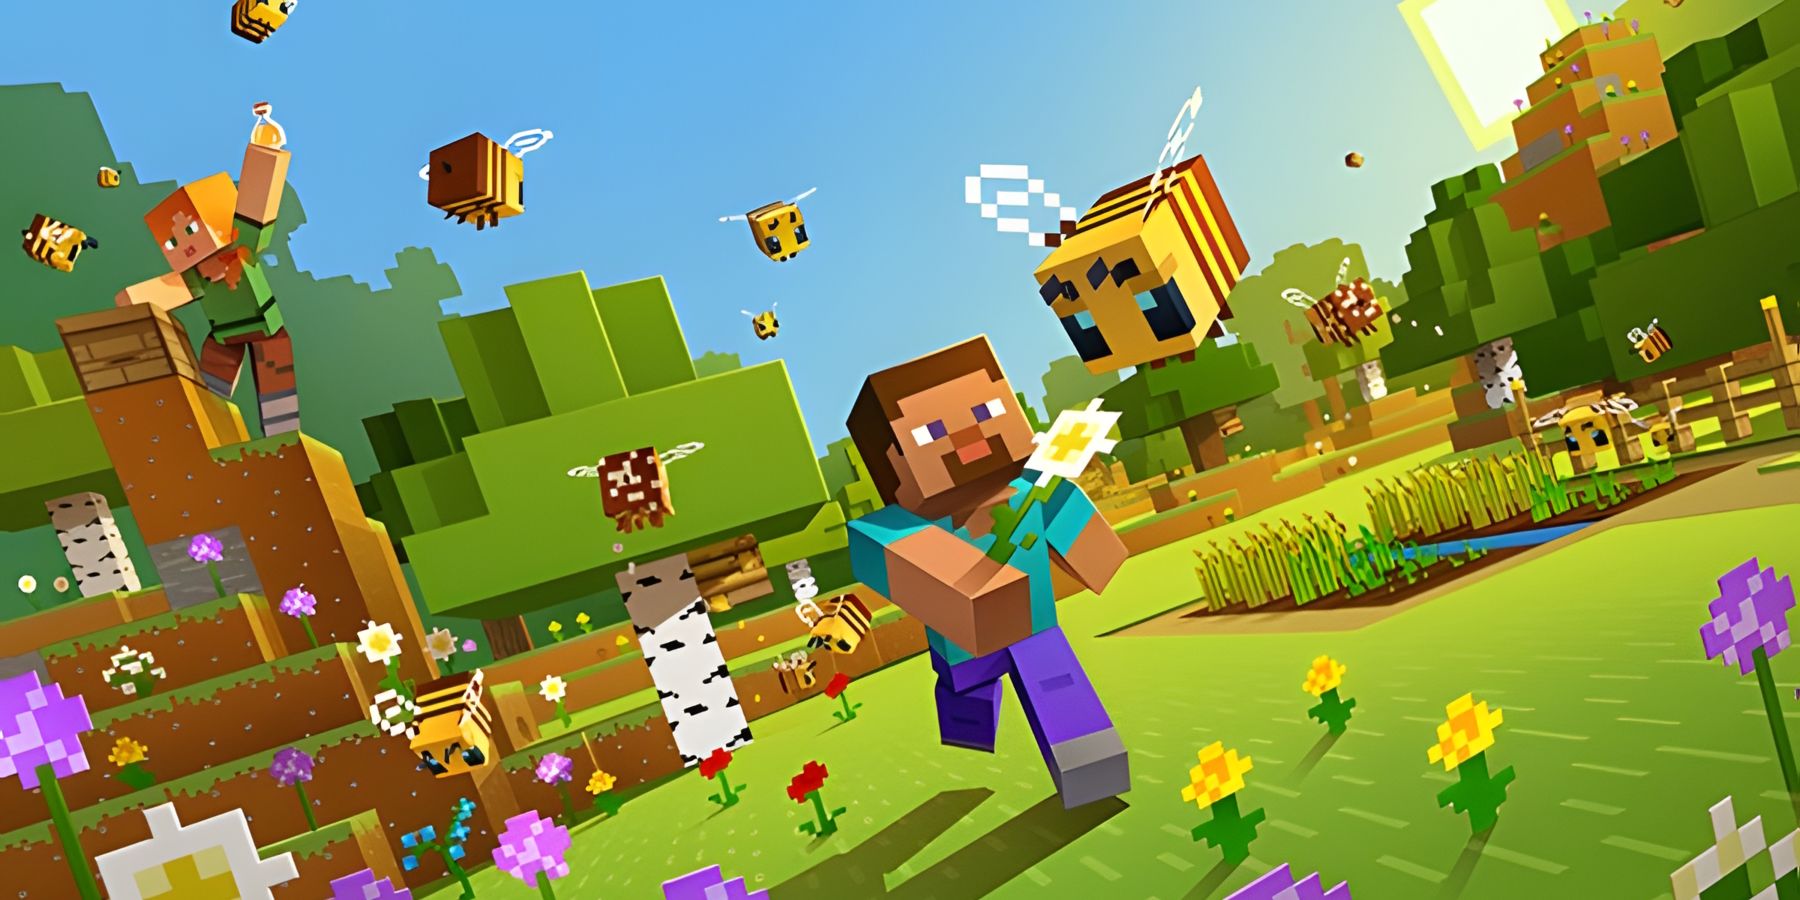 Minecraft Steve chasing bees